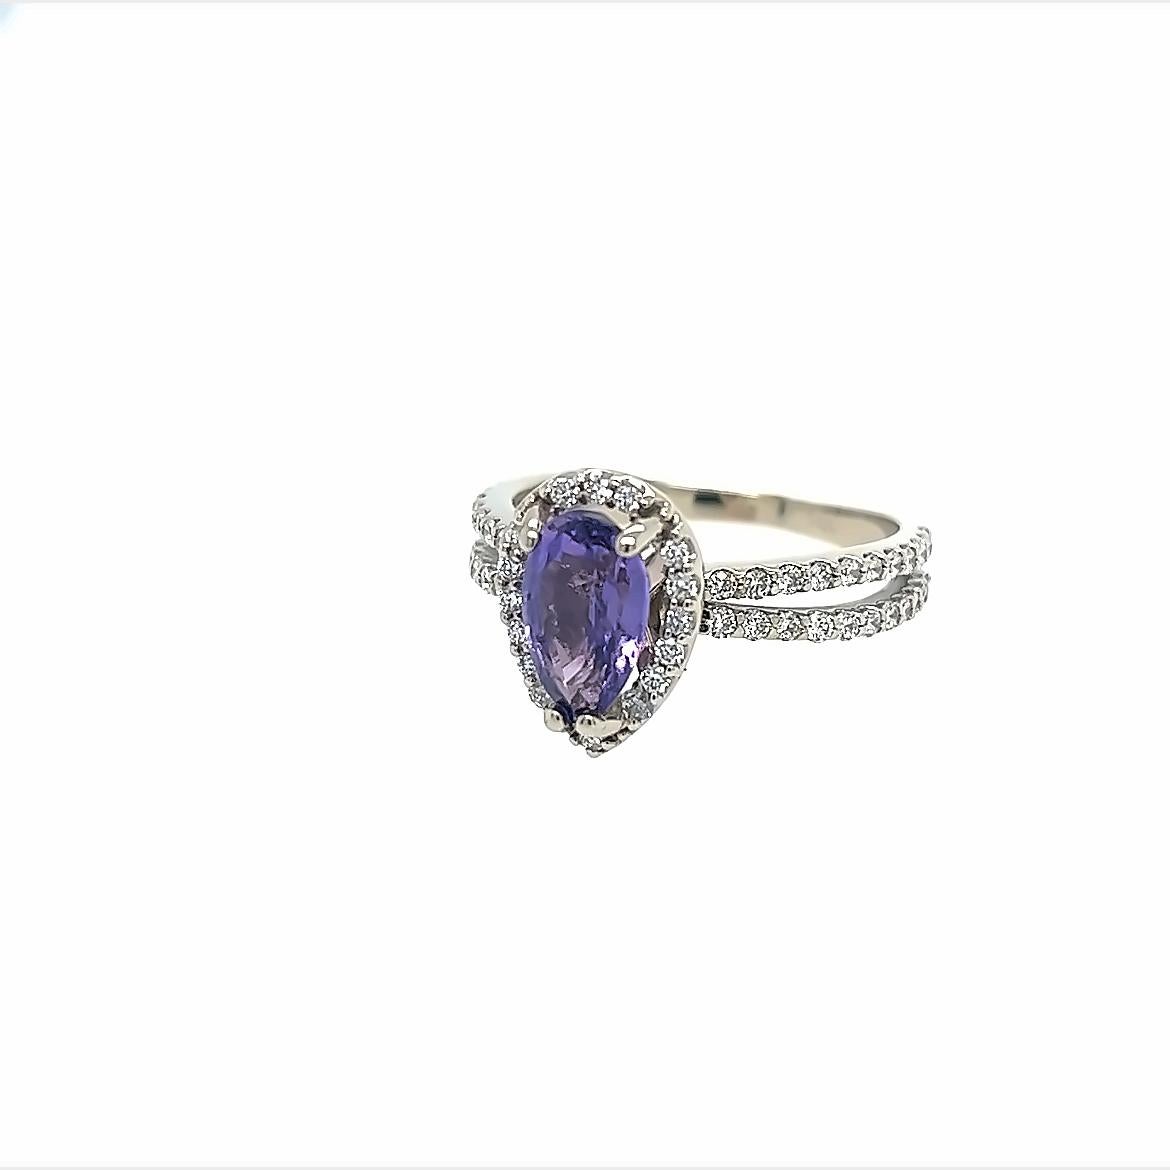 1.54 Carat Ceylon Purple Stunning Sapphire & Diamond Ring Set In Wht 14k Gold .  
This Certified One Of Kind Violet Ceylon Sapphire with .75Cts Of VS1 Diamonds ,In A Unique 14K White Gold Setting.
This Color Of This  Sapphire  is very Rare With AAAA